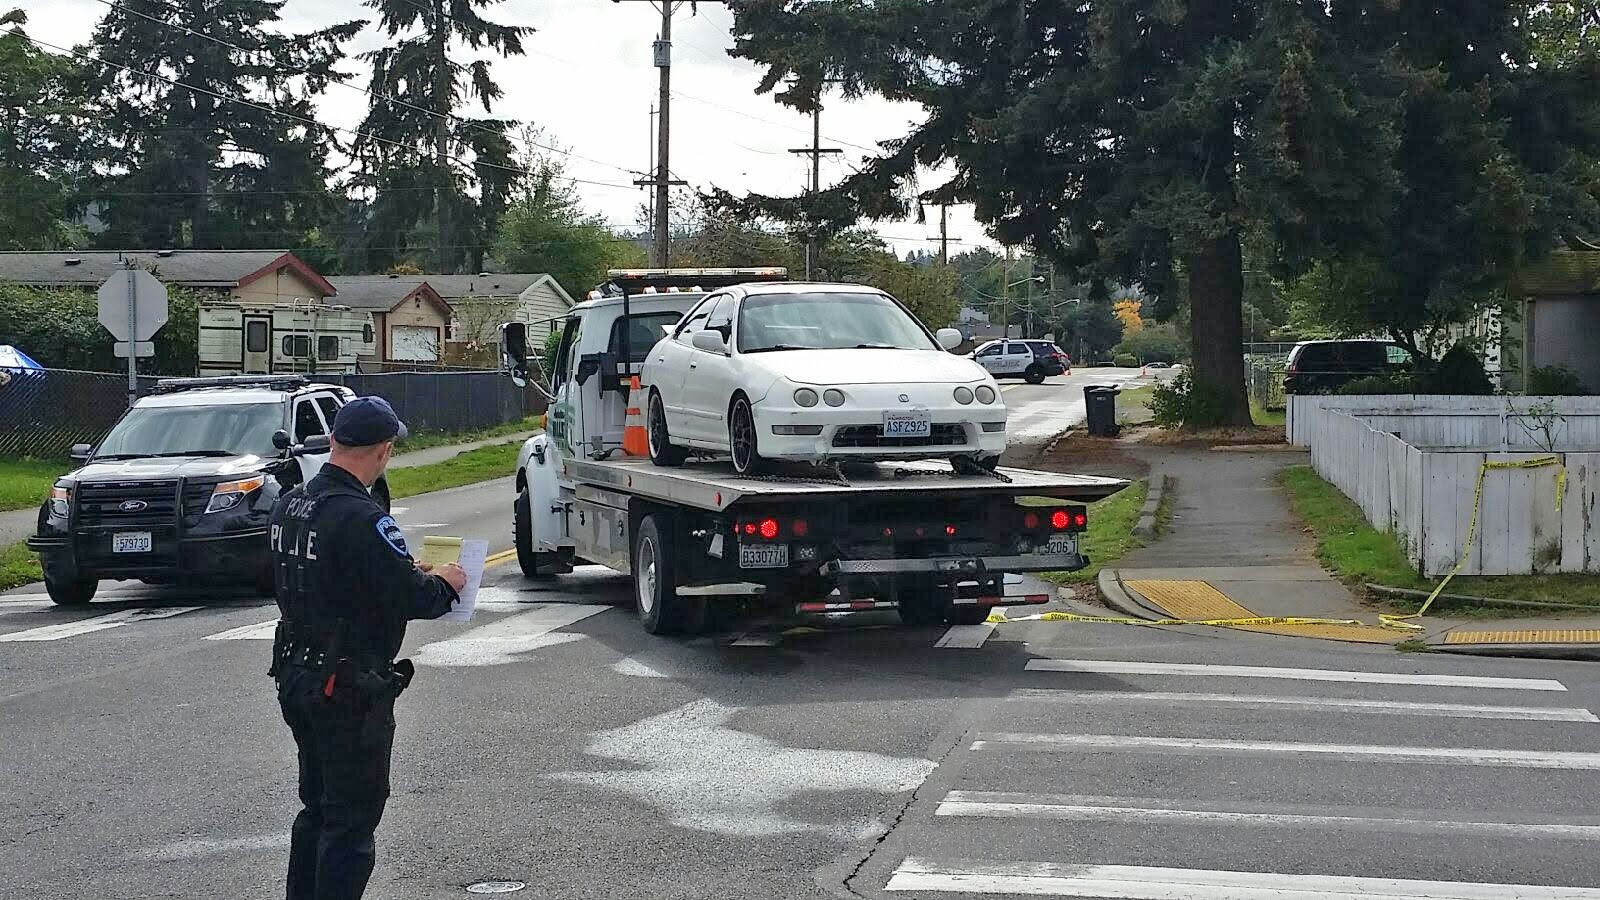 An Auburn Police officer halts traffic as a tow truck hauls away the car in which a 17-year-old boy was killed early Friday morning in south Auburn. ROBERT WHALE